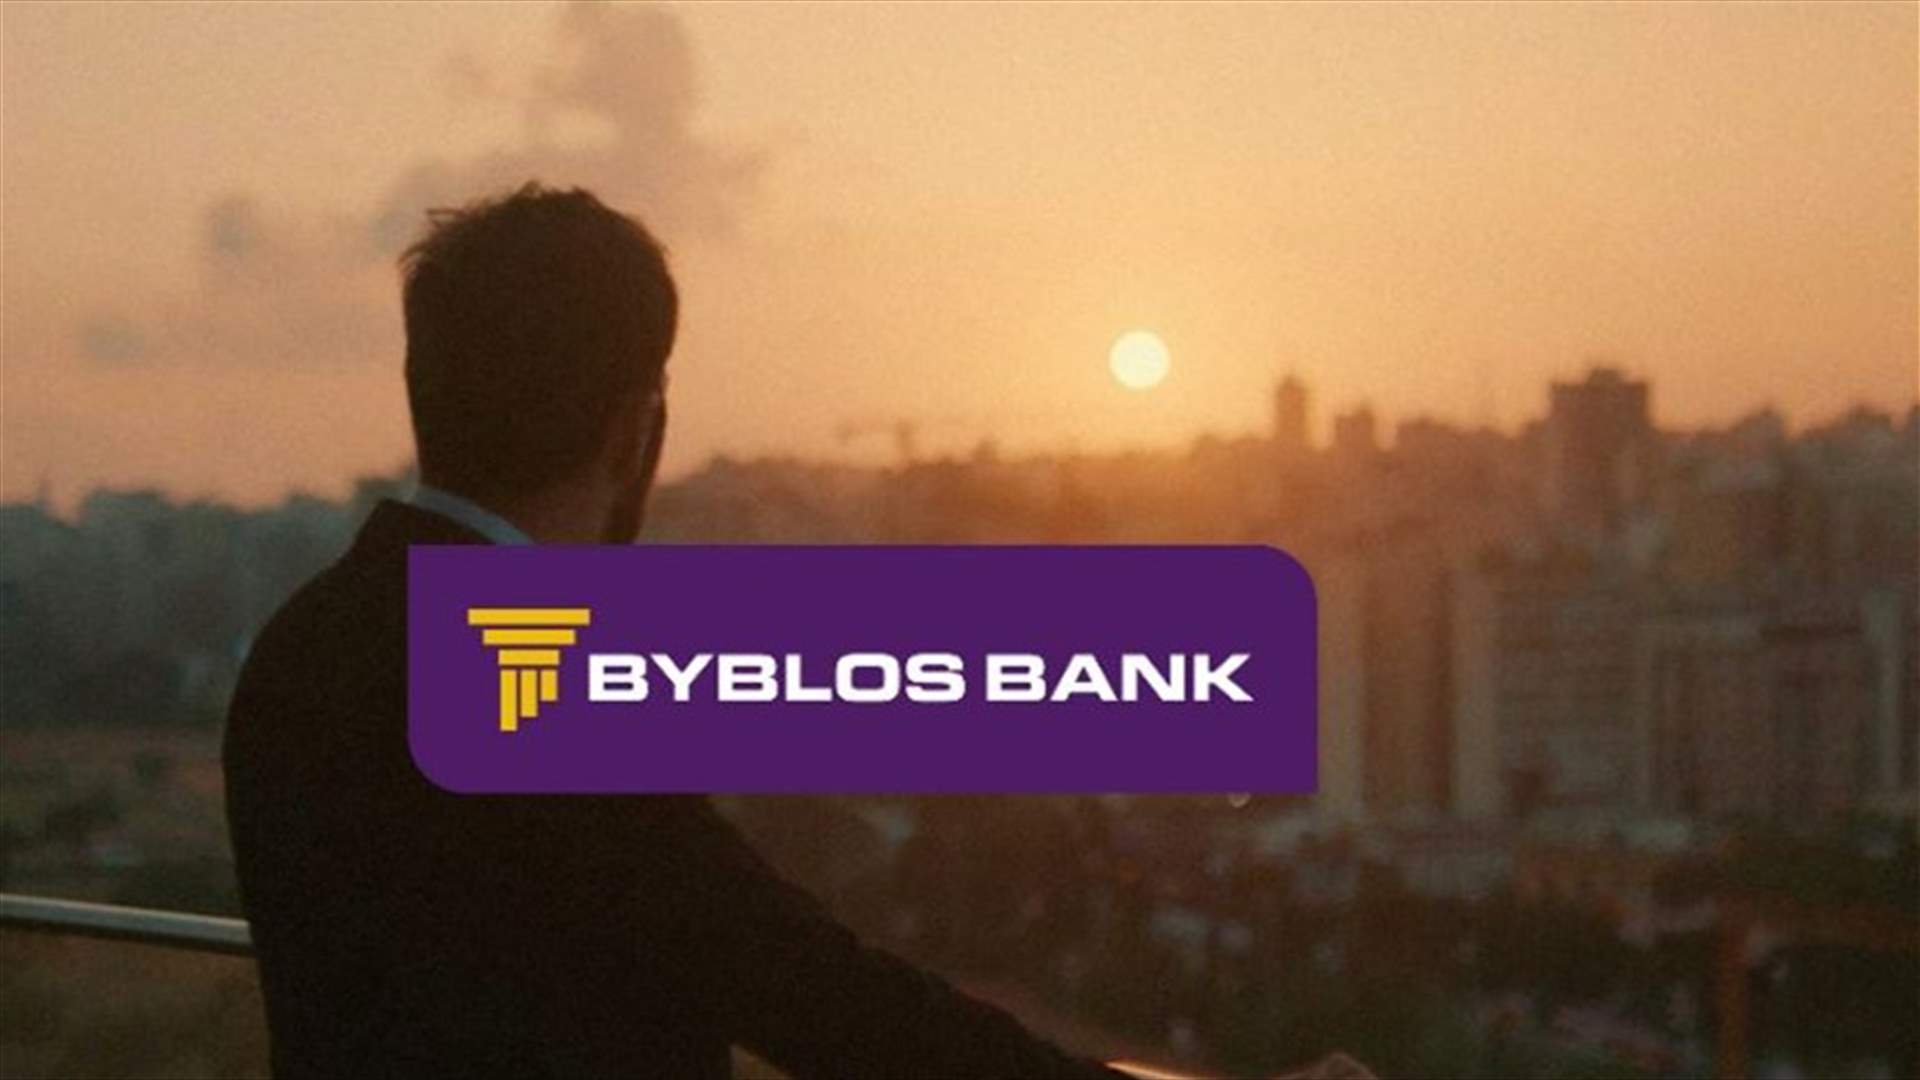 Byblos Bank is reaching out to entrepreneurs in Lebanon and let them know that their dreams and hopes can be realized